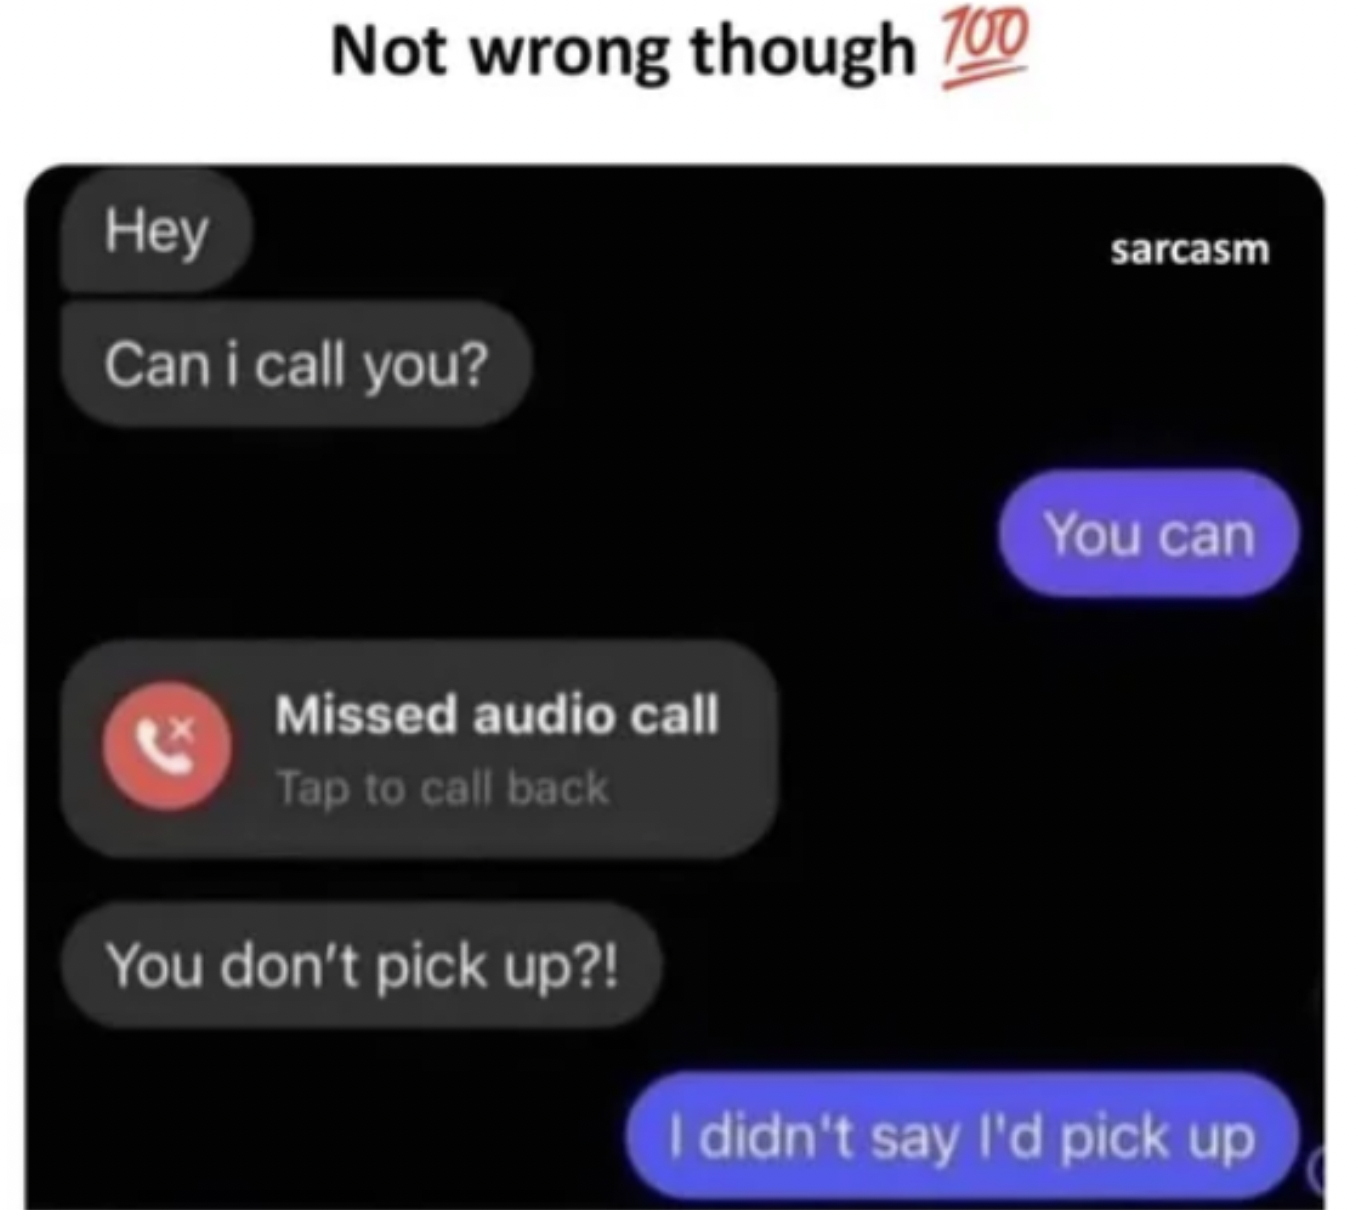 cringe pics - can i call meme - Not wrong though 700 Hey Can i call you? Missed audio call Tap to call back You don't pick up?! sarcasm You can I didn't say I'd pick up